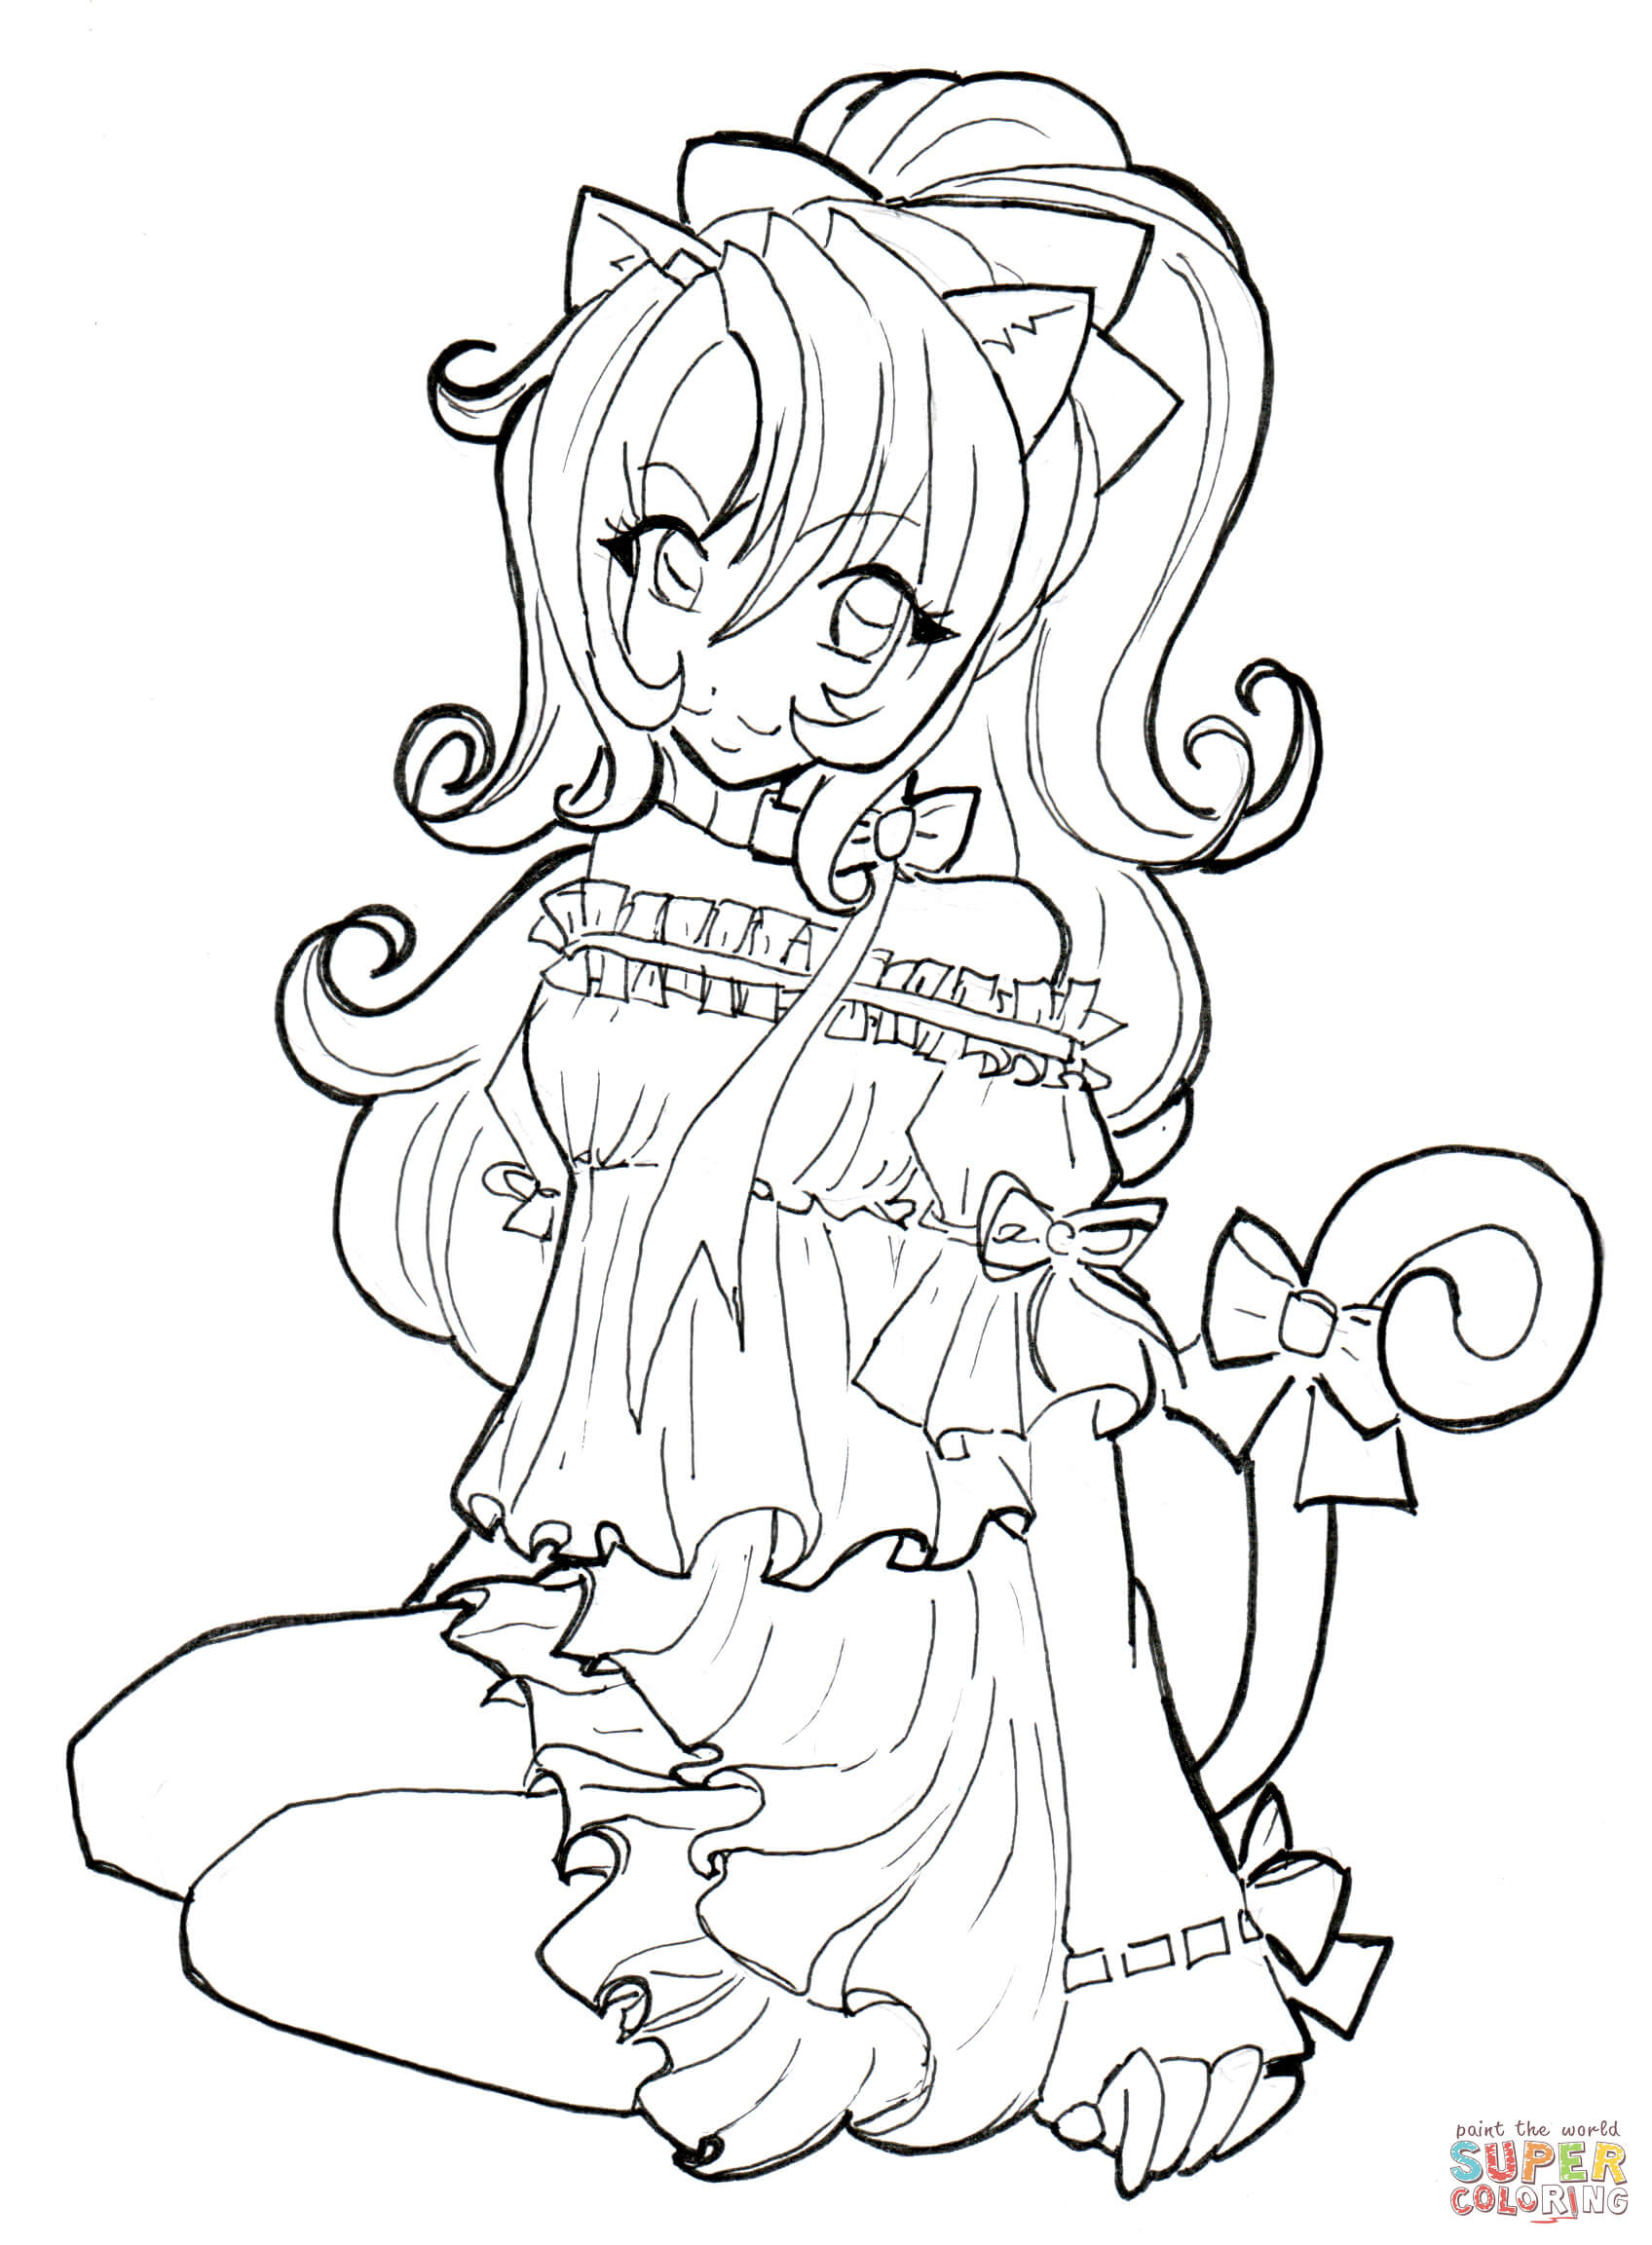 Cute Anime Coloring Pages at GetDrawings Free download